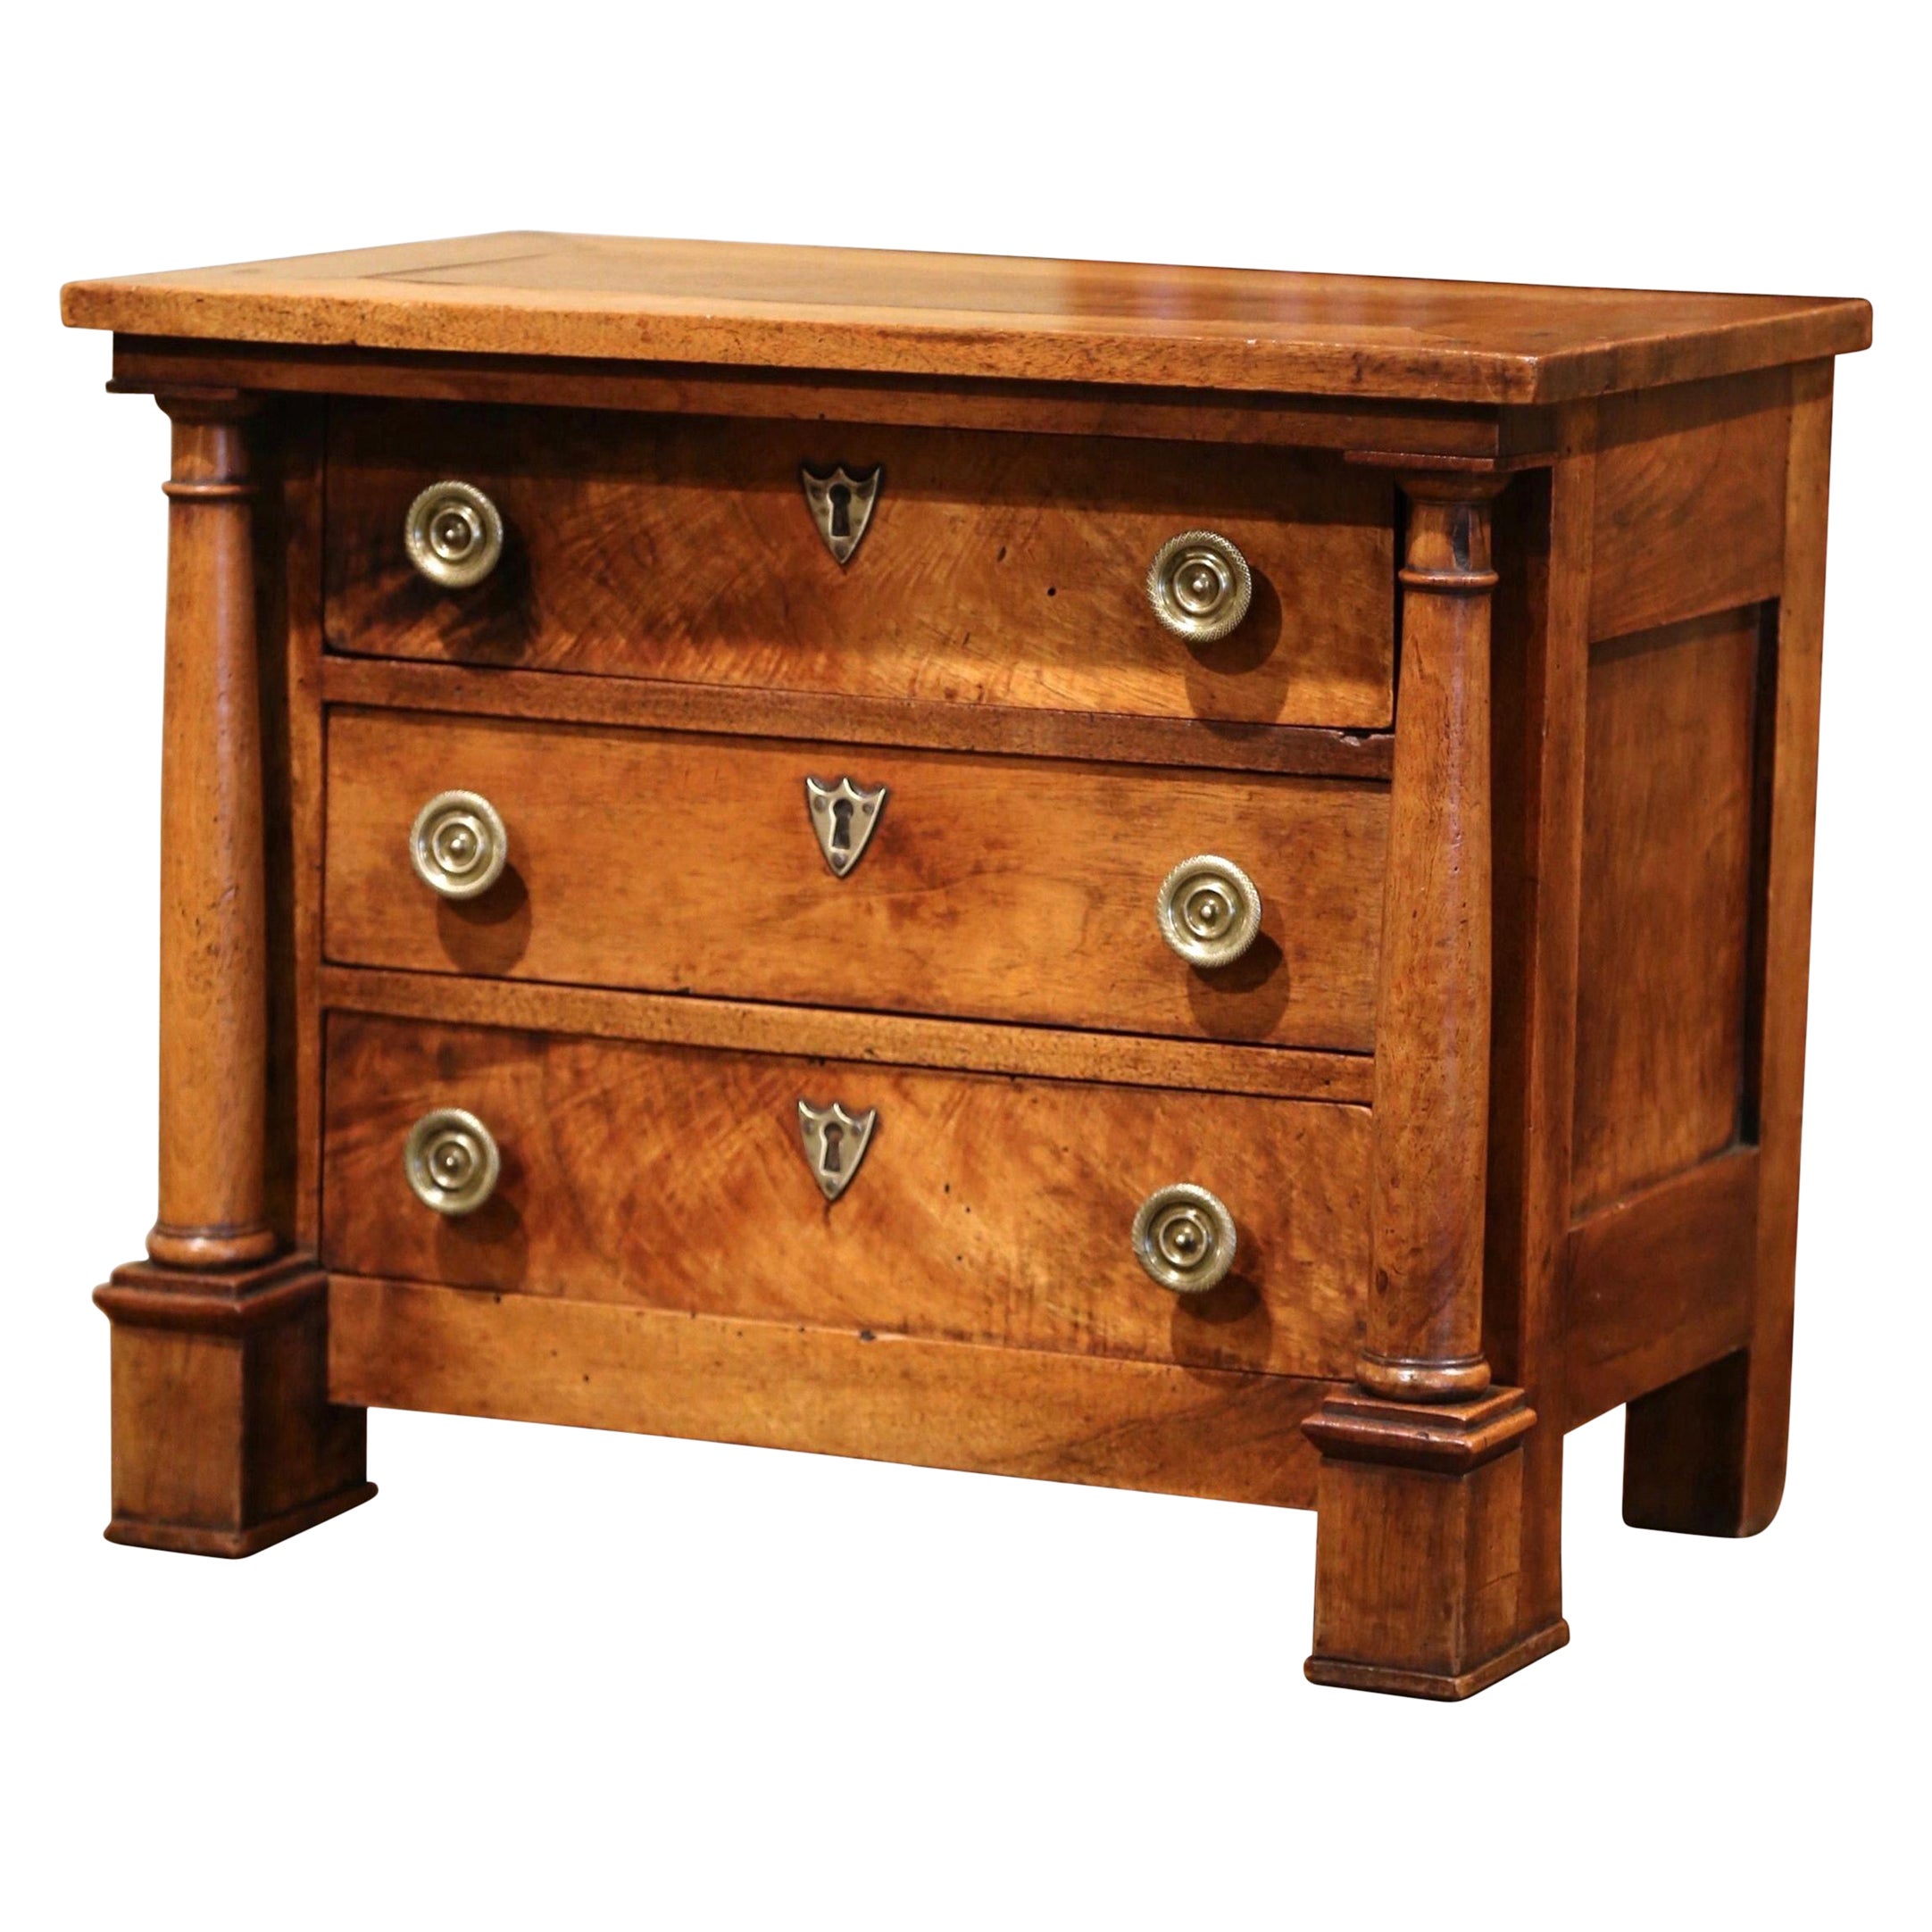 Early 19th Century French Louis Philippe Carved Walnut Miniature Commode Chest